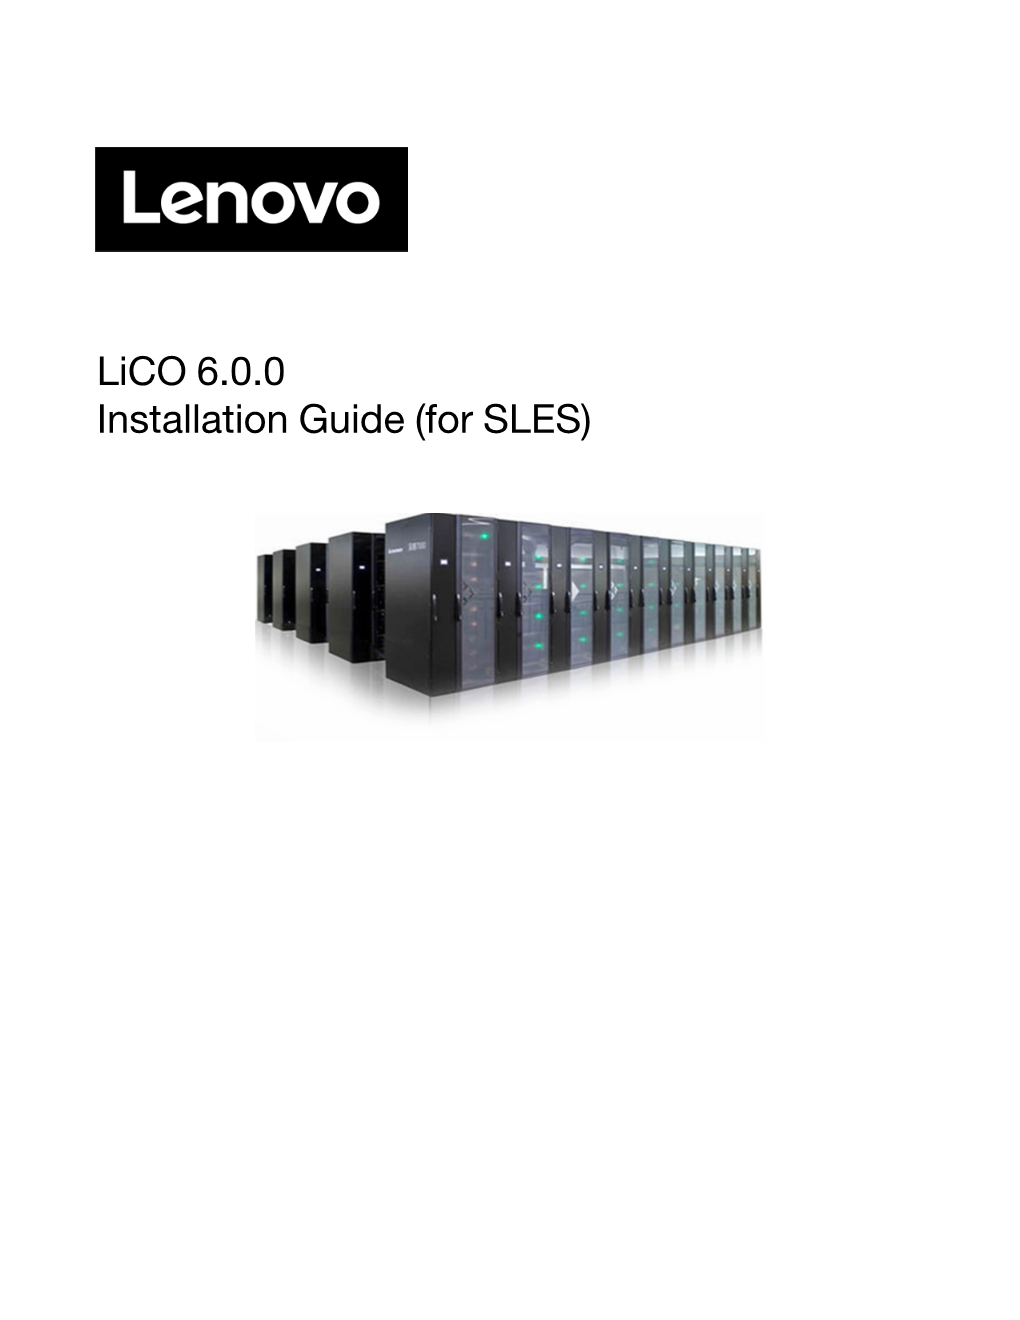 Lico 6.0.0 Installation Guide (For SLES) Seventh Edition (August 2020)